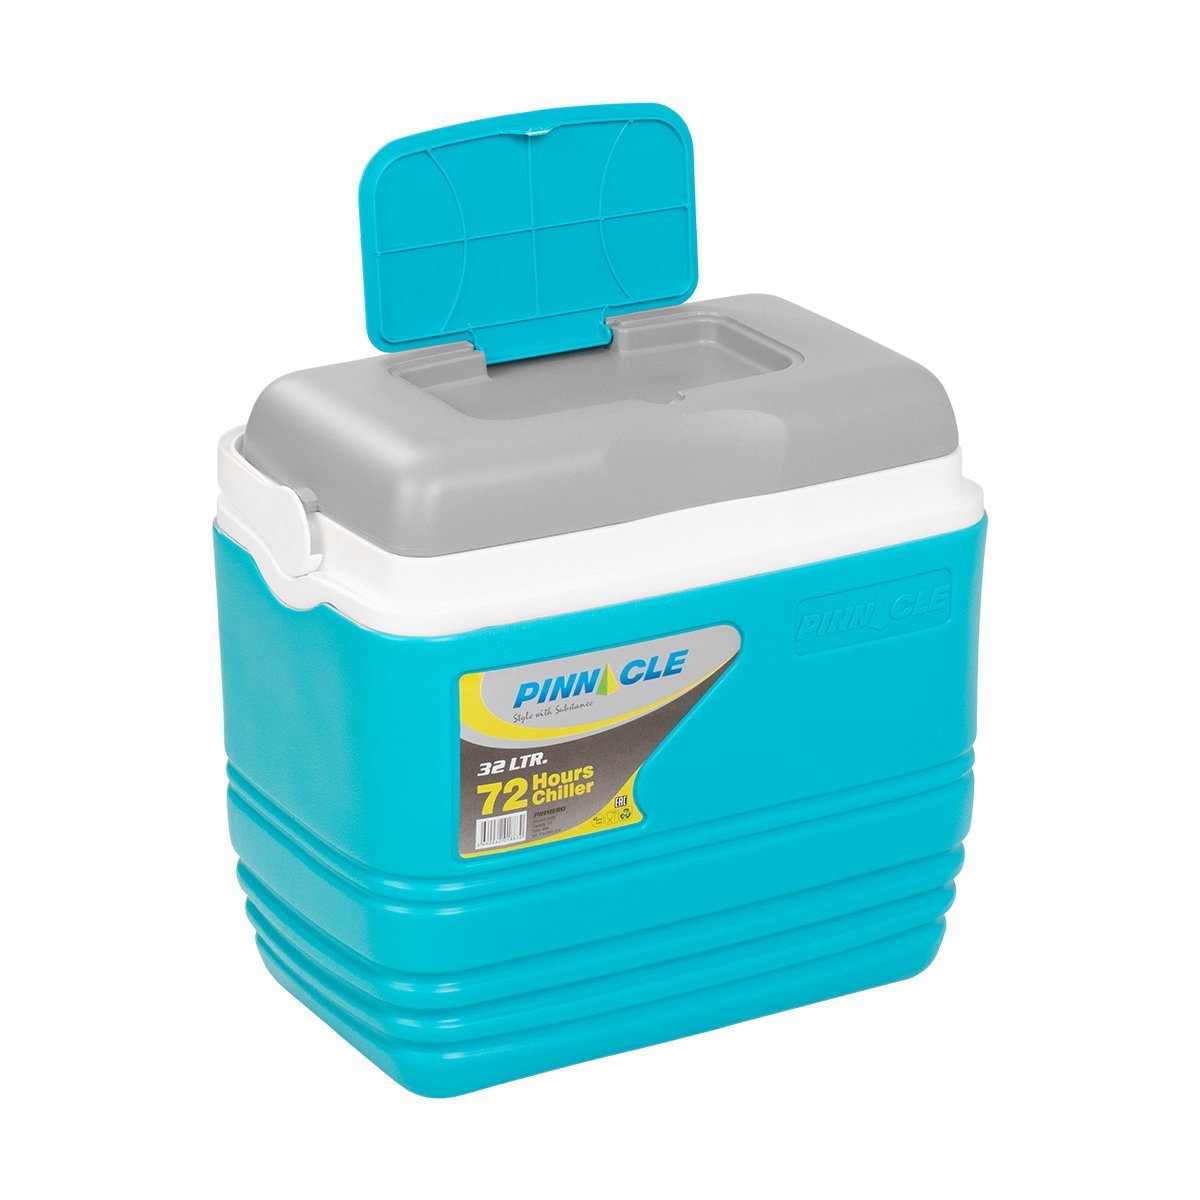 Primero Portable Camping Ice Chest with Lid Cup Holders, 33 qt with an extra storage space in the lid